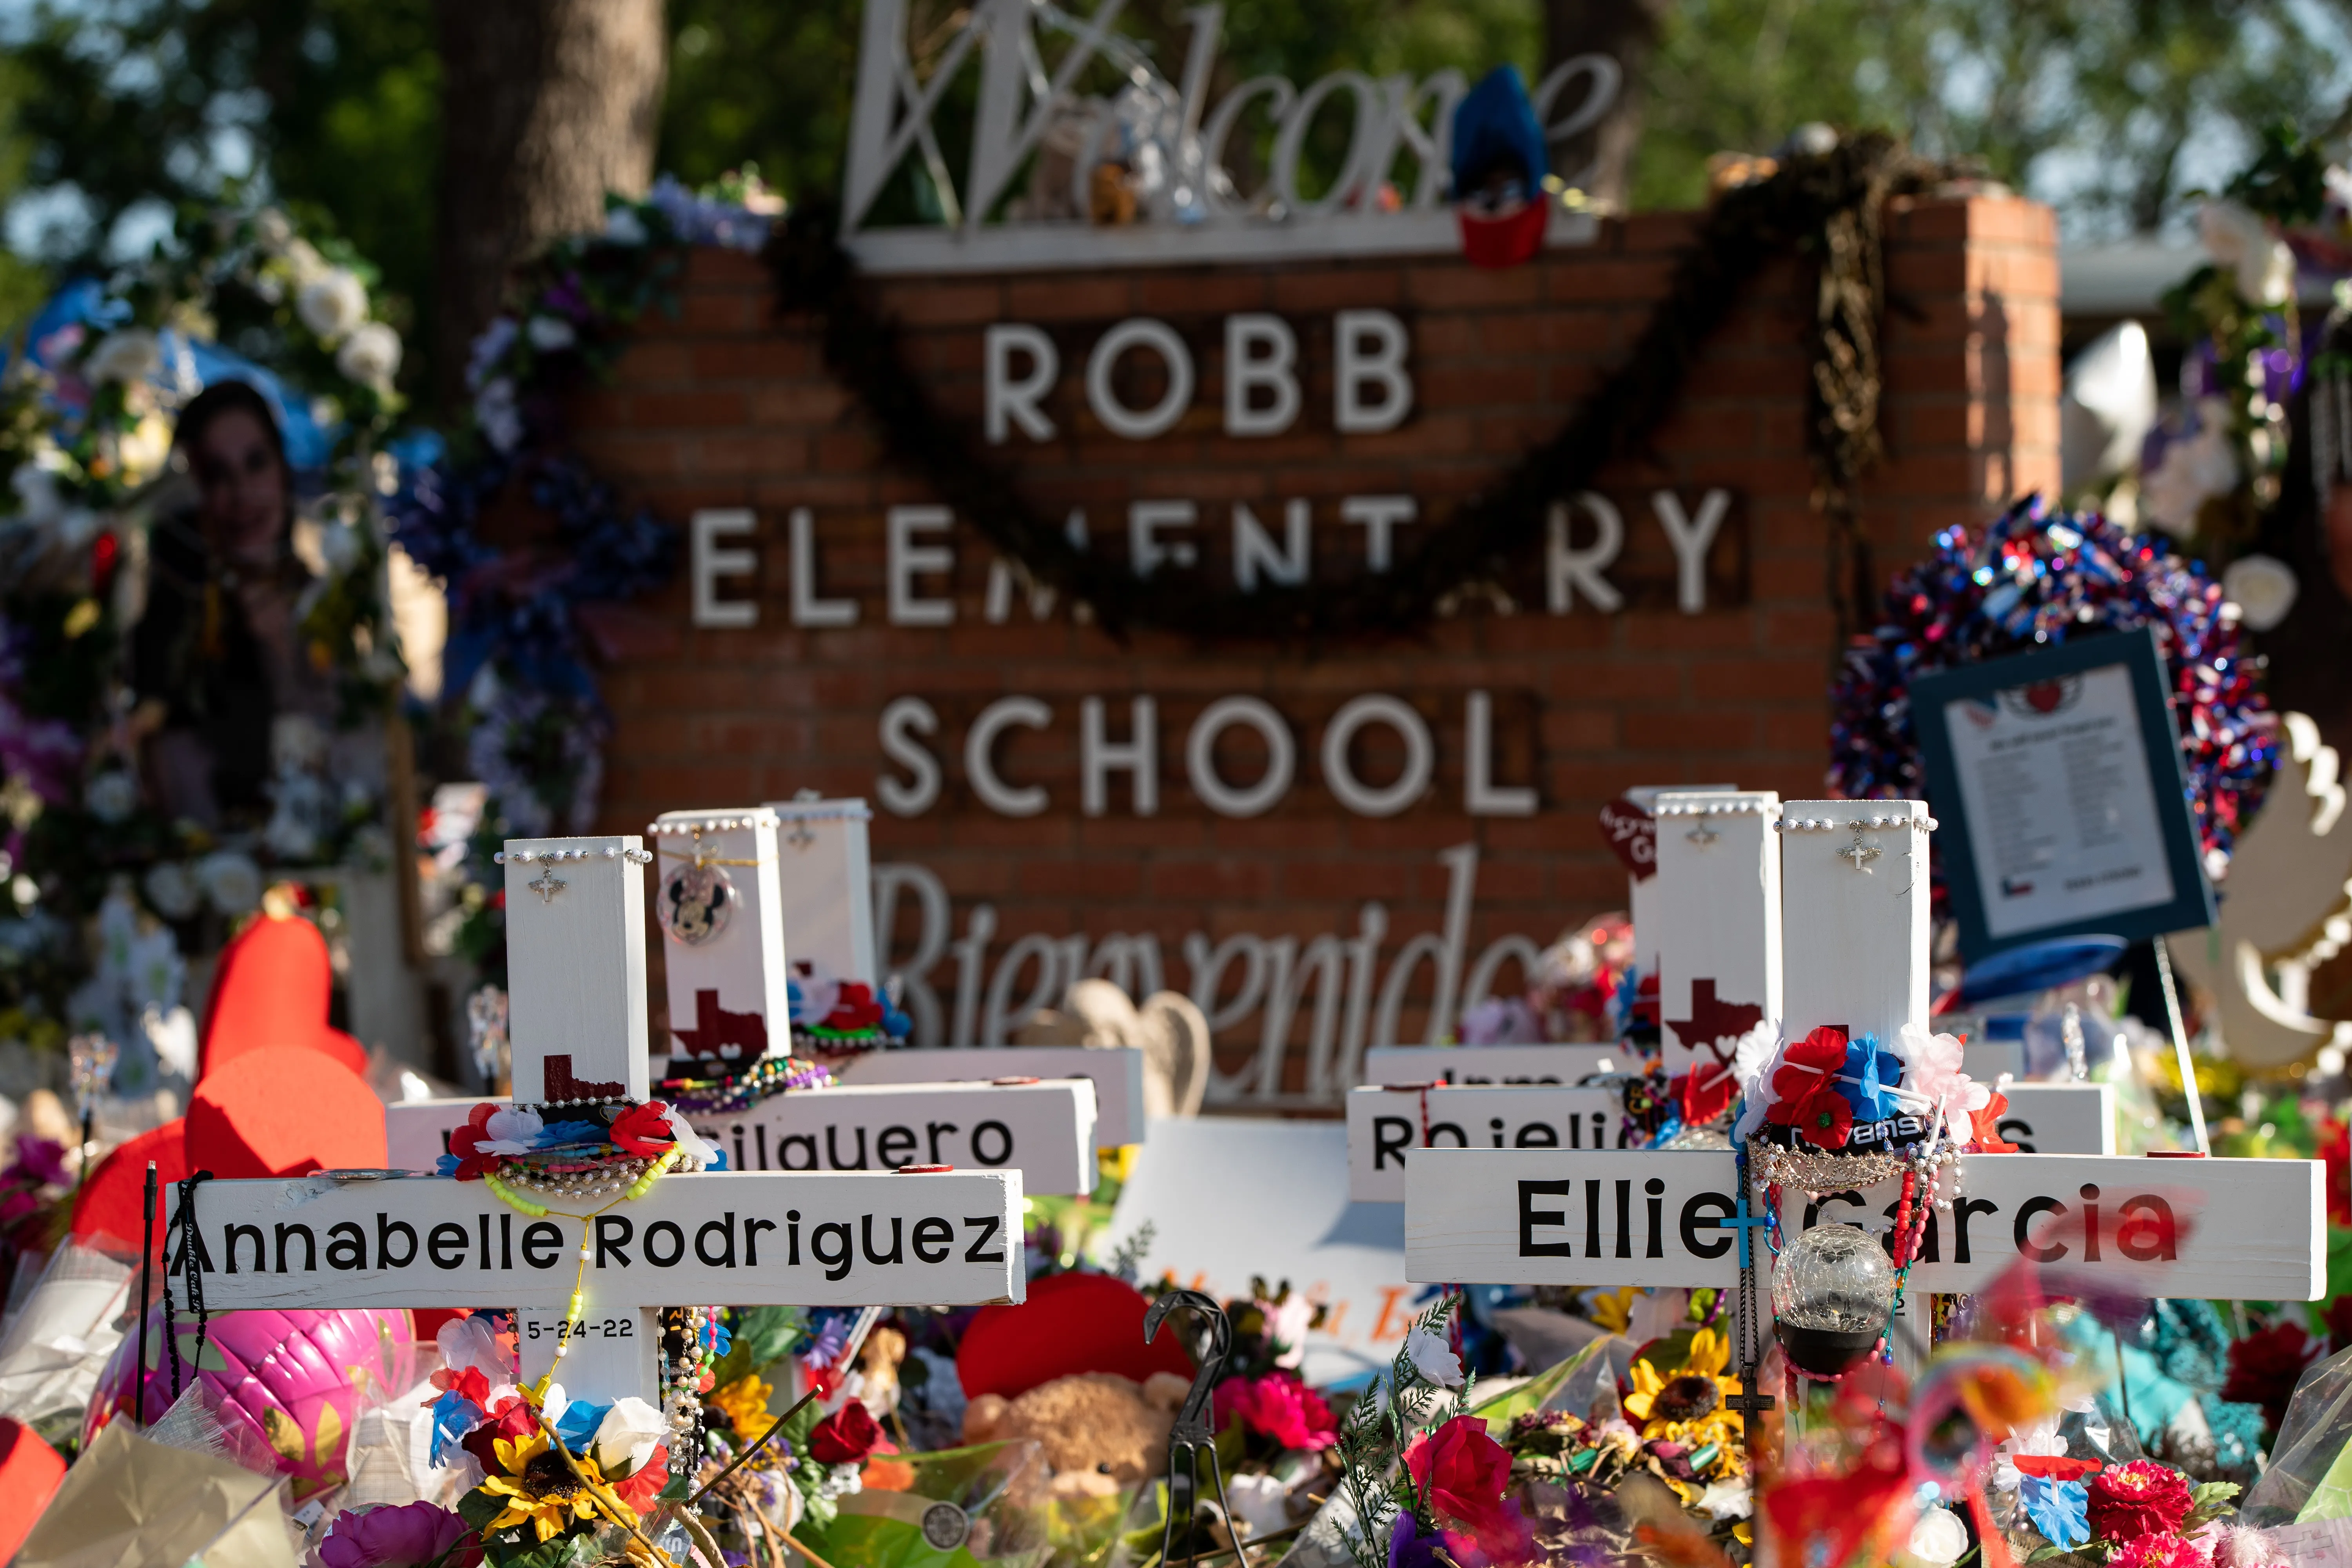 Texans on June 5, 2022, visit the memorial at Robb Elementary School dedicated to the victims of the May shooting in Uvalde, Texas.?w=200&h=150